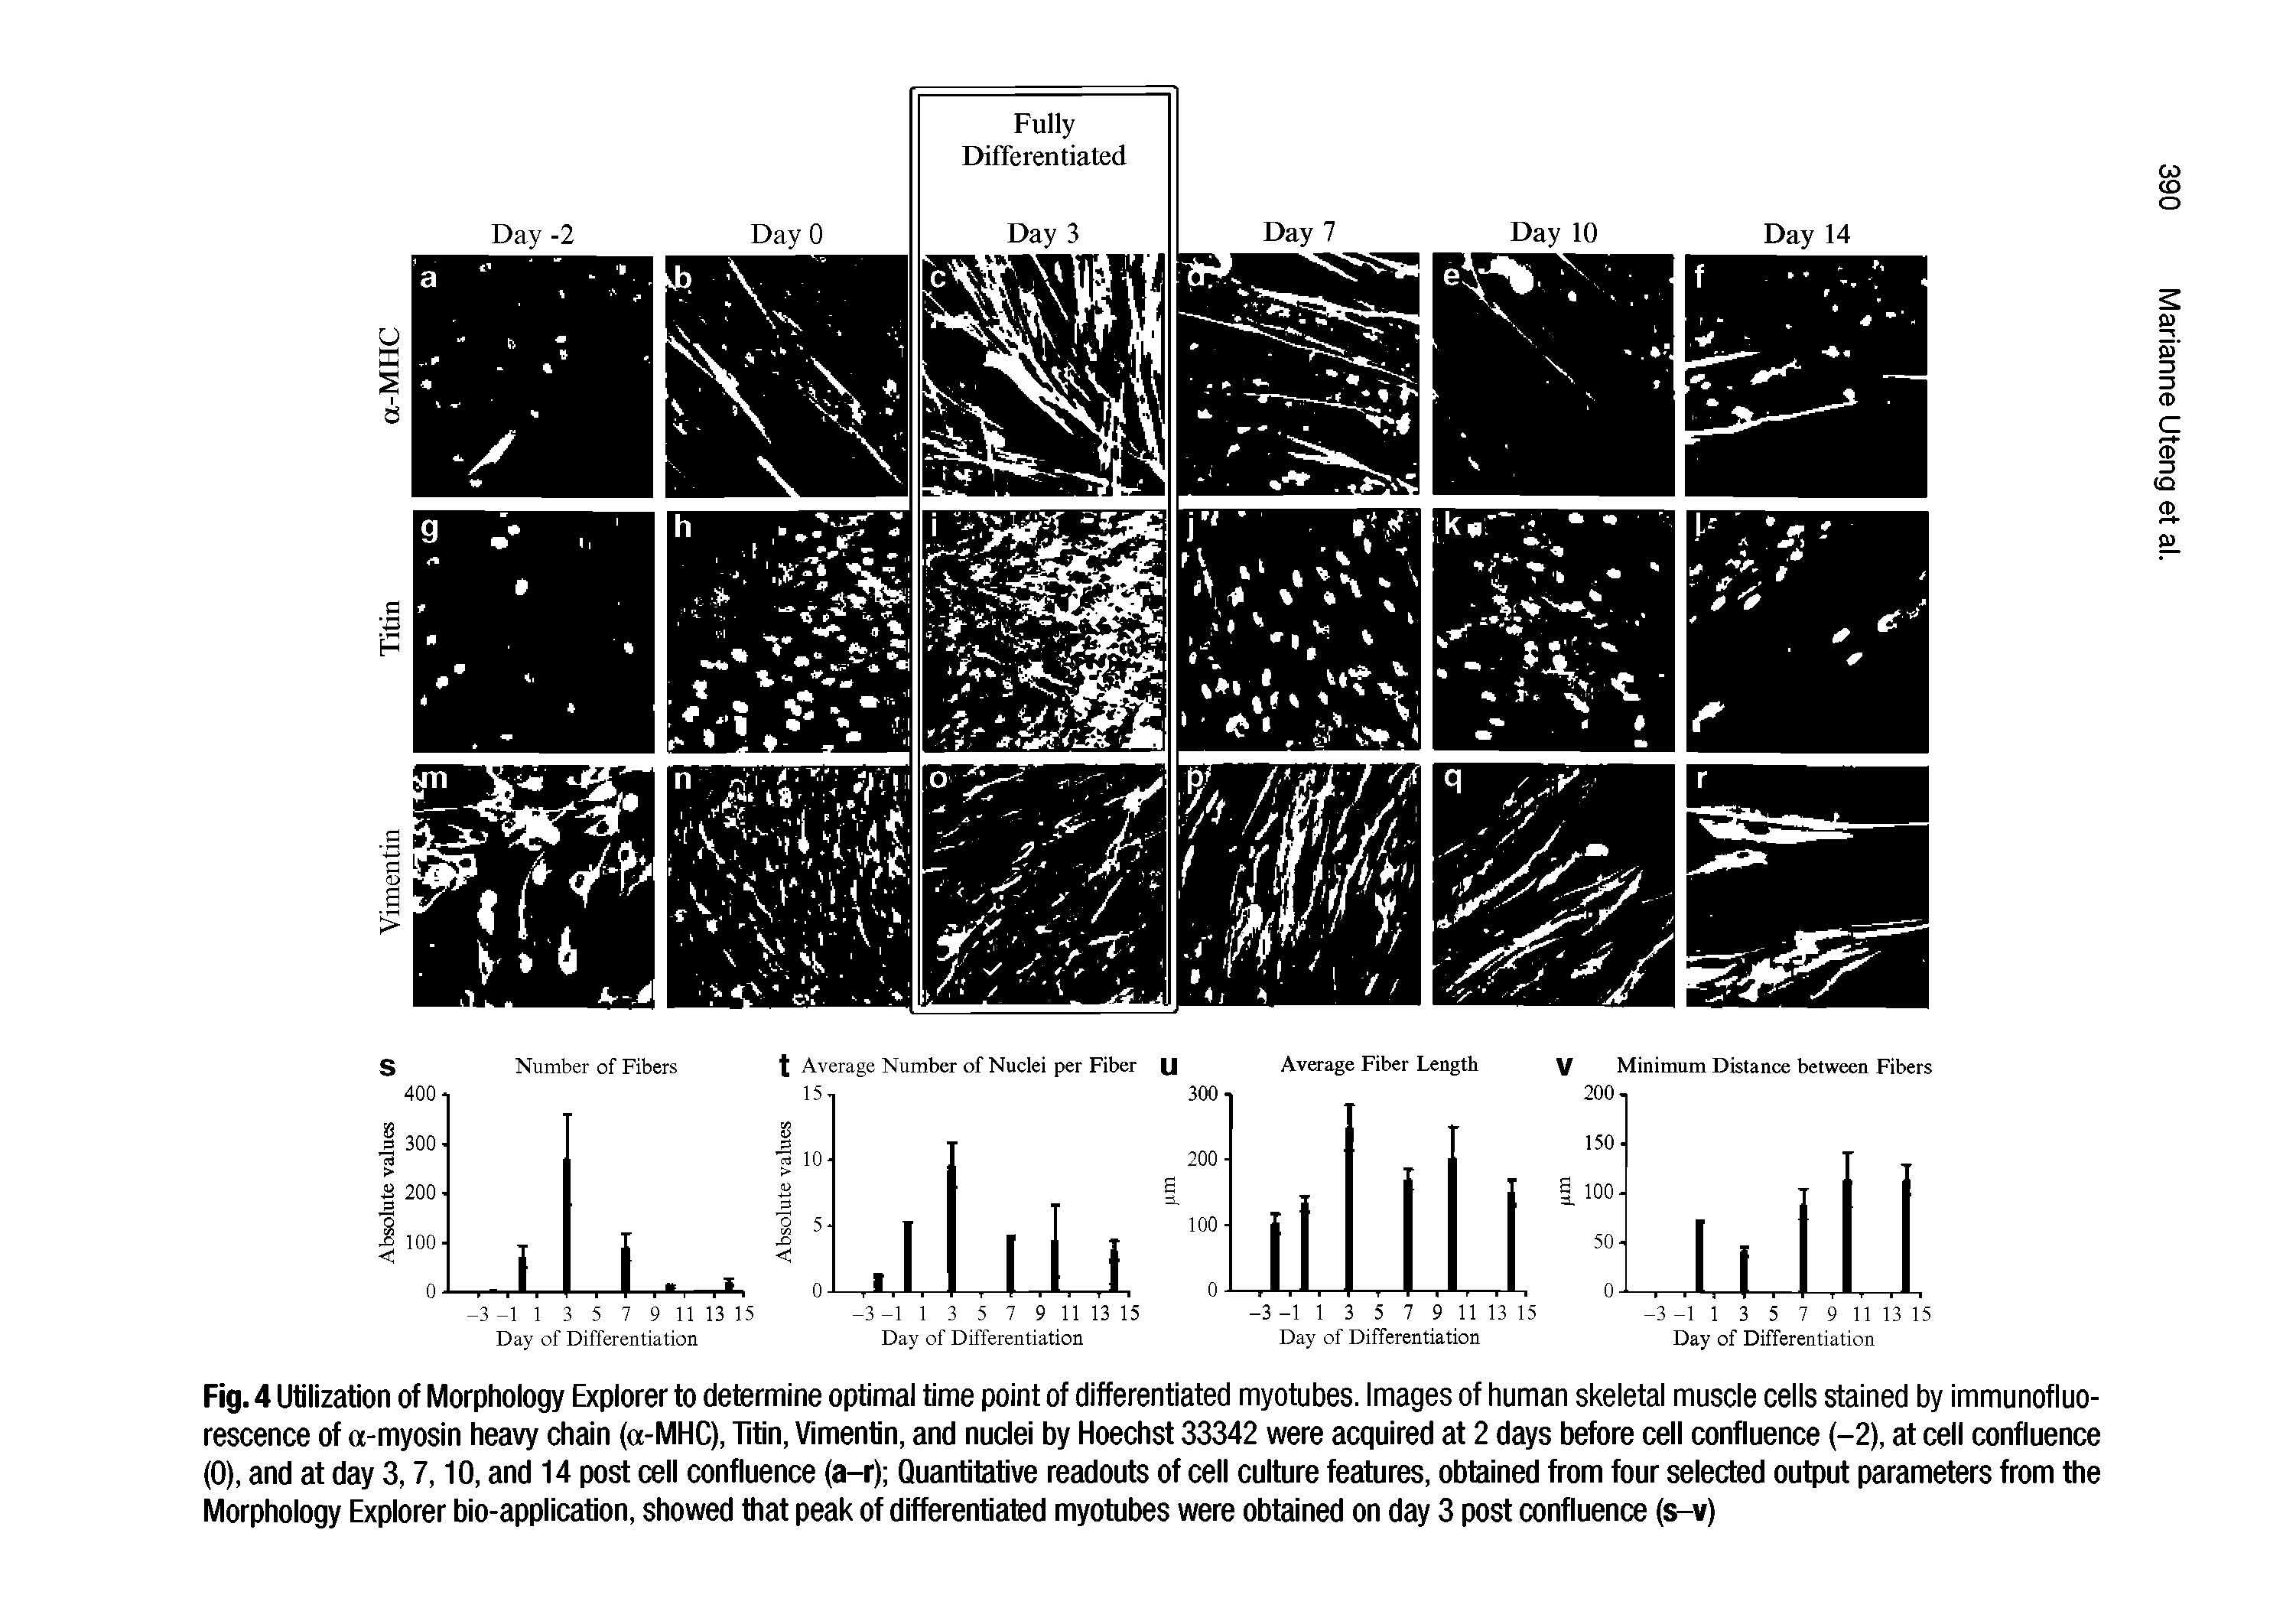 Fig. 4 Utilization of Morphology Explorer to determine optimal time point of differentiated myotubes. Images of human skeletal muscle cells stained by immunofluorescence of a-myosin heavy chain (a-MHC), Titin, Vimentin, and nuclei by Hoechst 33342 were acquired at 2 days before cell confluence (-2), at cell confluence (0), and at day 3,7,10, and 14 post cell confluence (a-r) Quantitative readouts of cell culture features, obtained from four selected output parameters from the Morphology Explorer bio-application, showed that peak of differentiated myotubes were obtained on day 3 post confluence (s-v)...